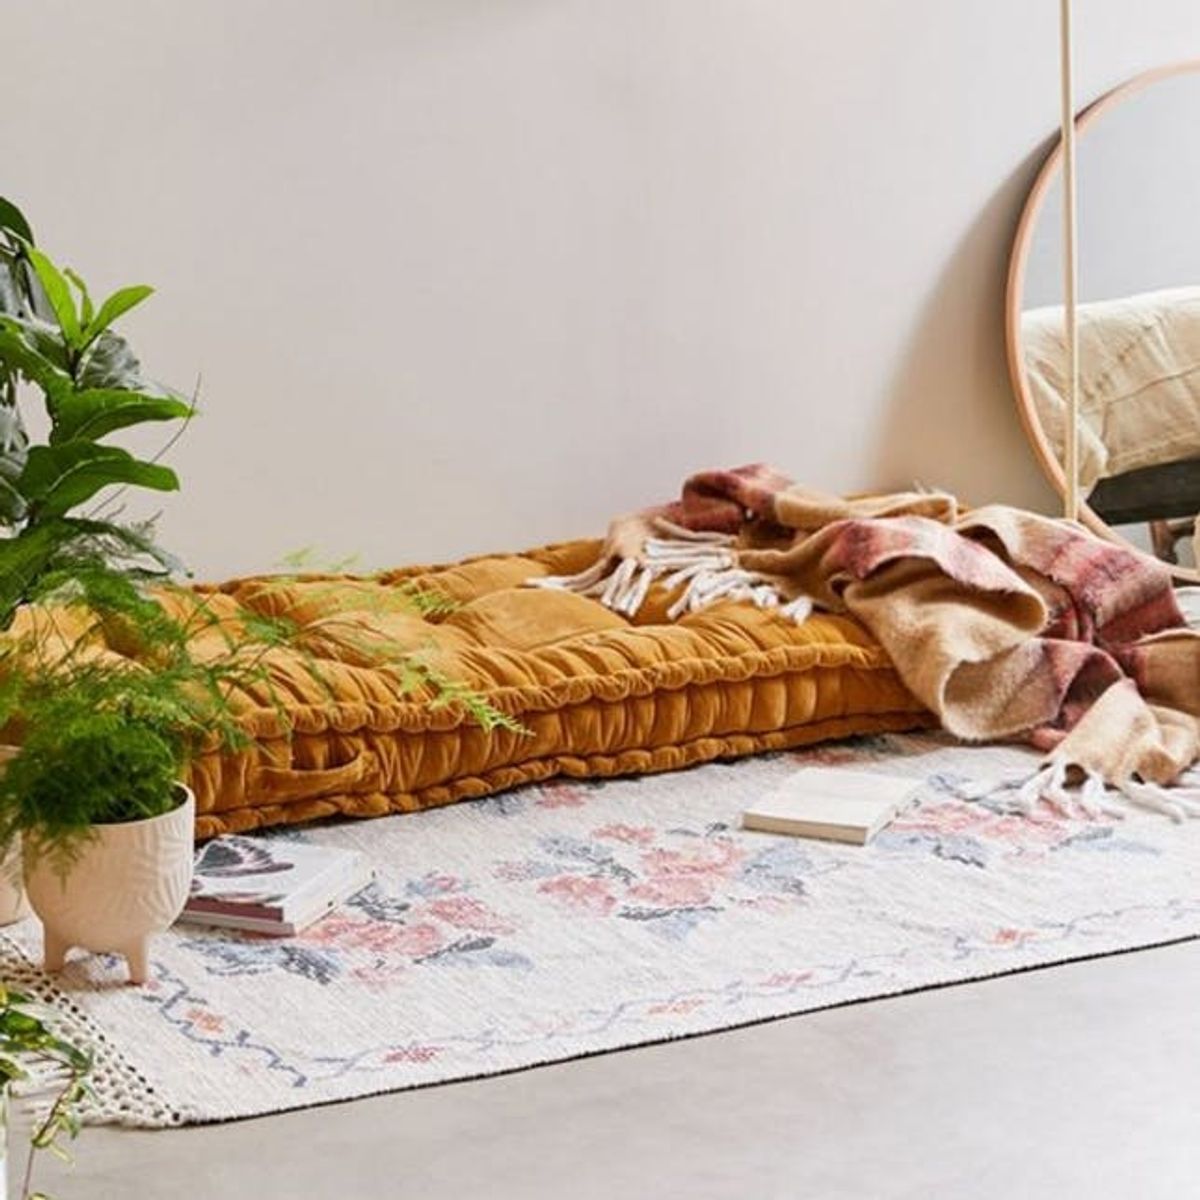 Every Boho-Beautiful Home Good We Want from Urban Outfitters’ Spring Collection